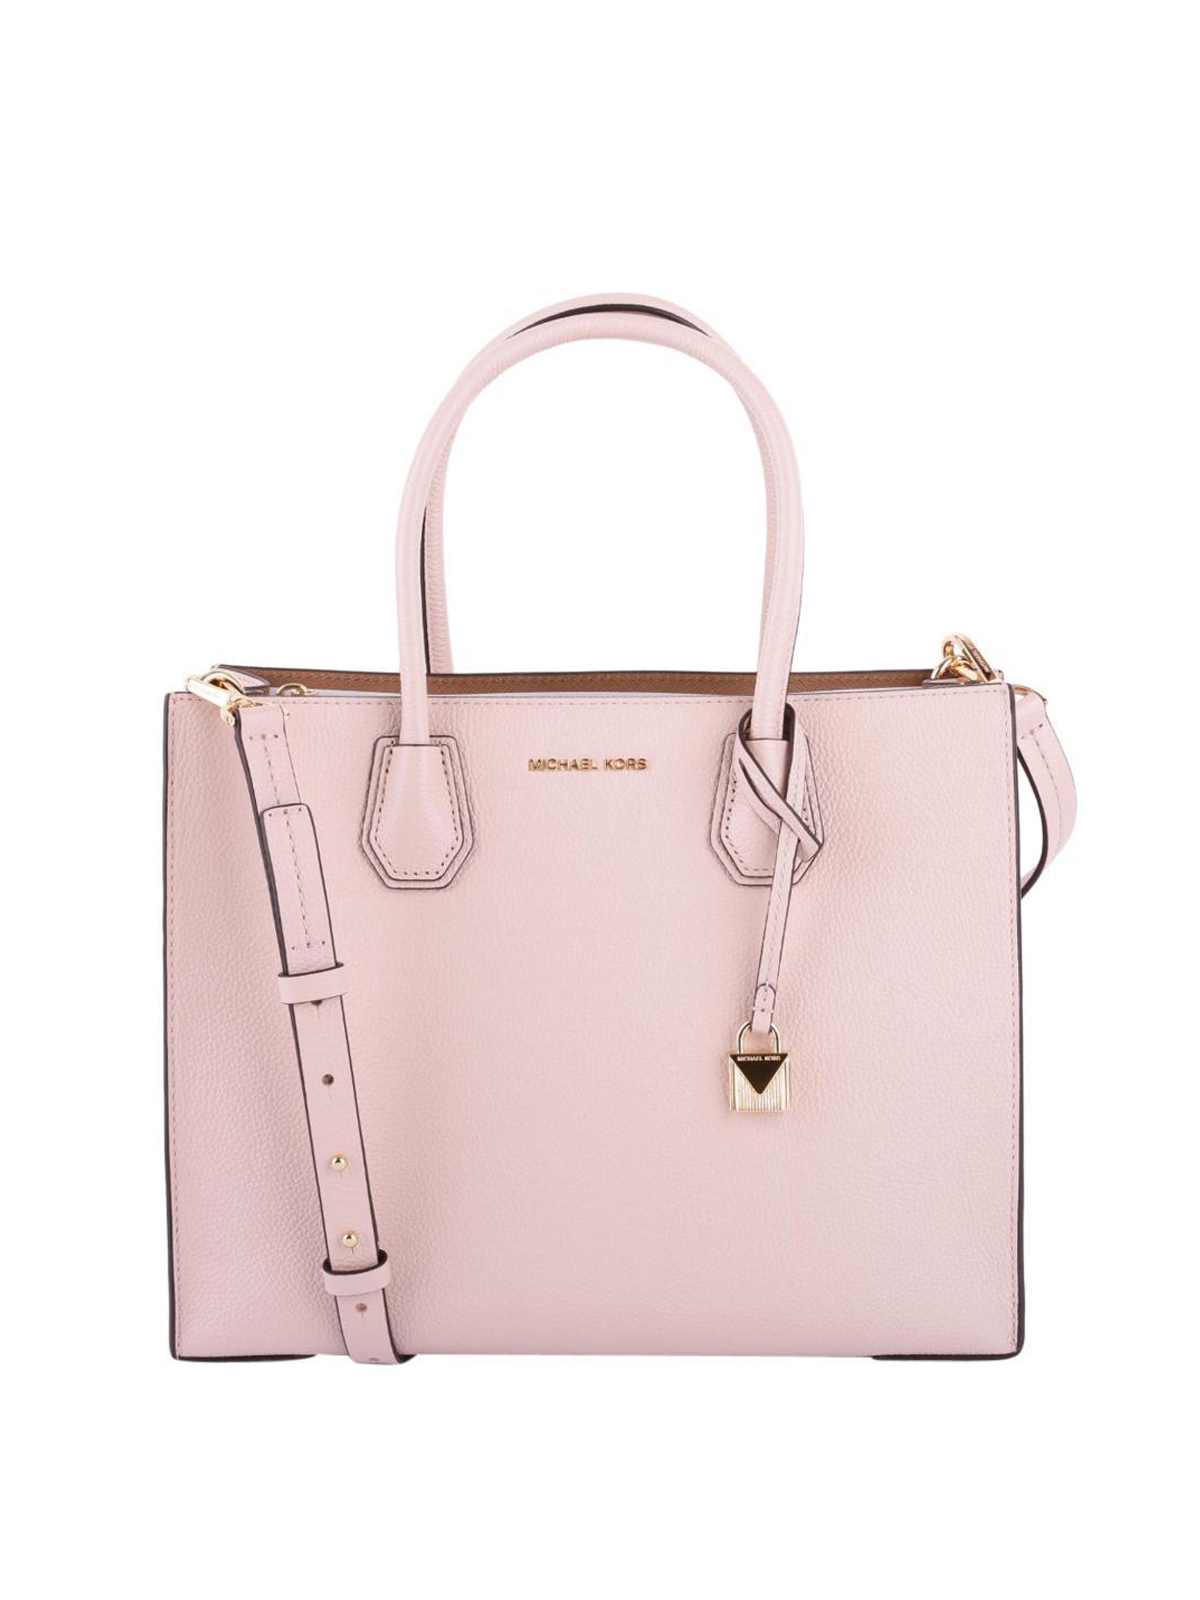 Mercer large soft pink leather tote 